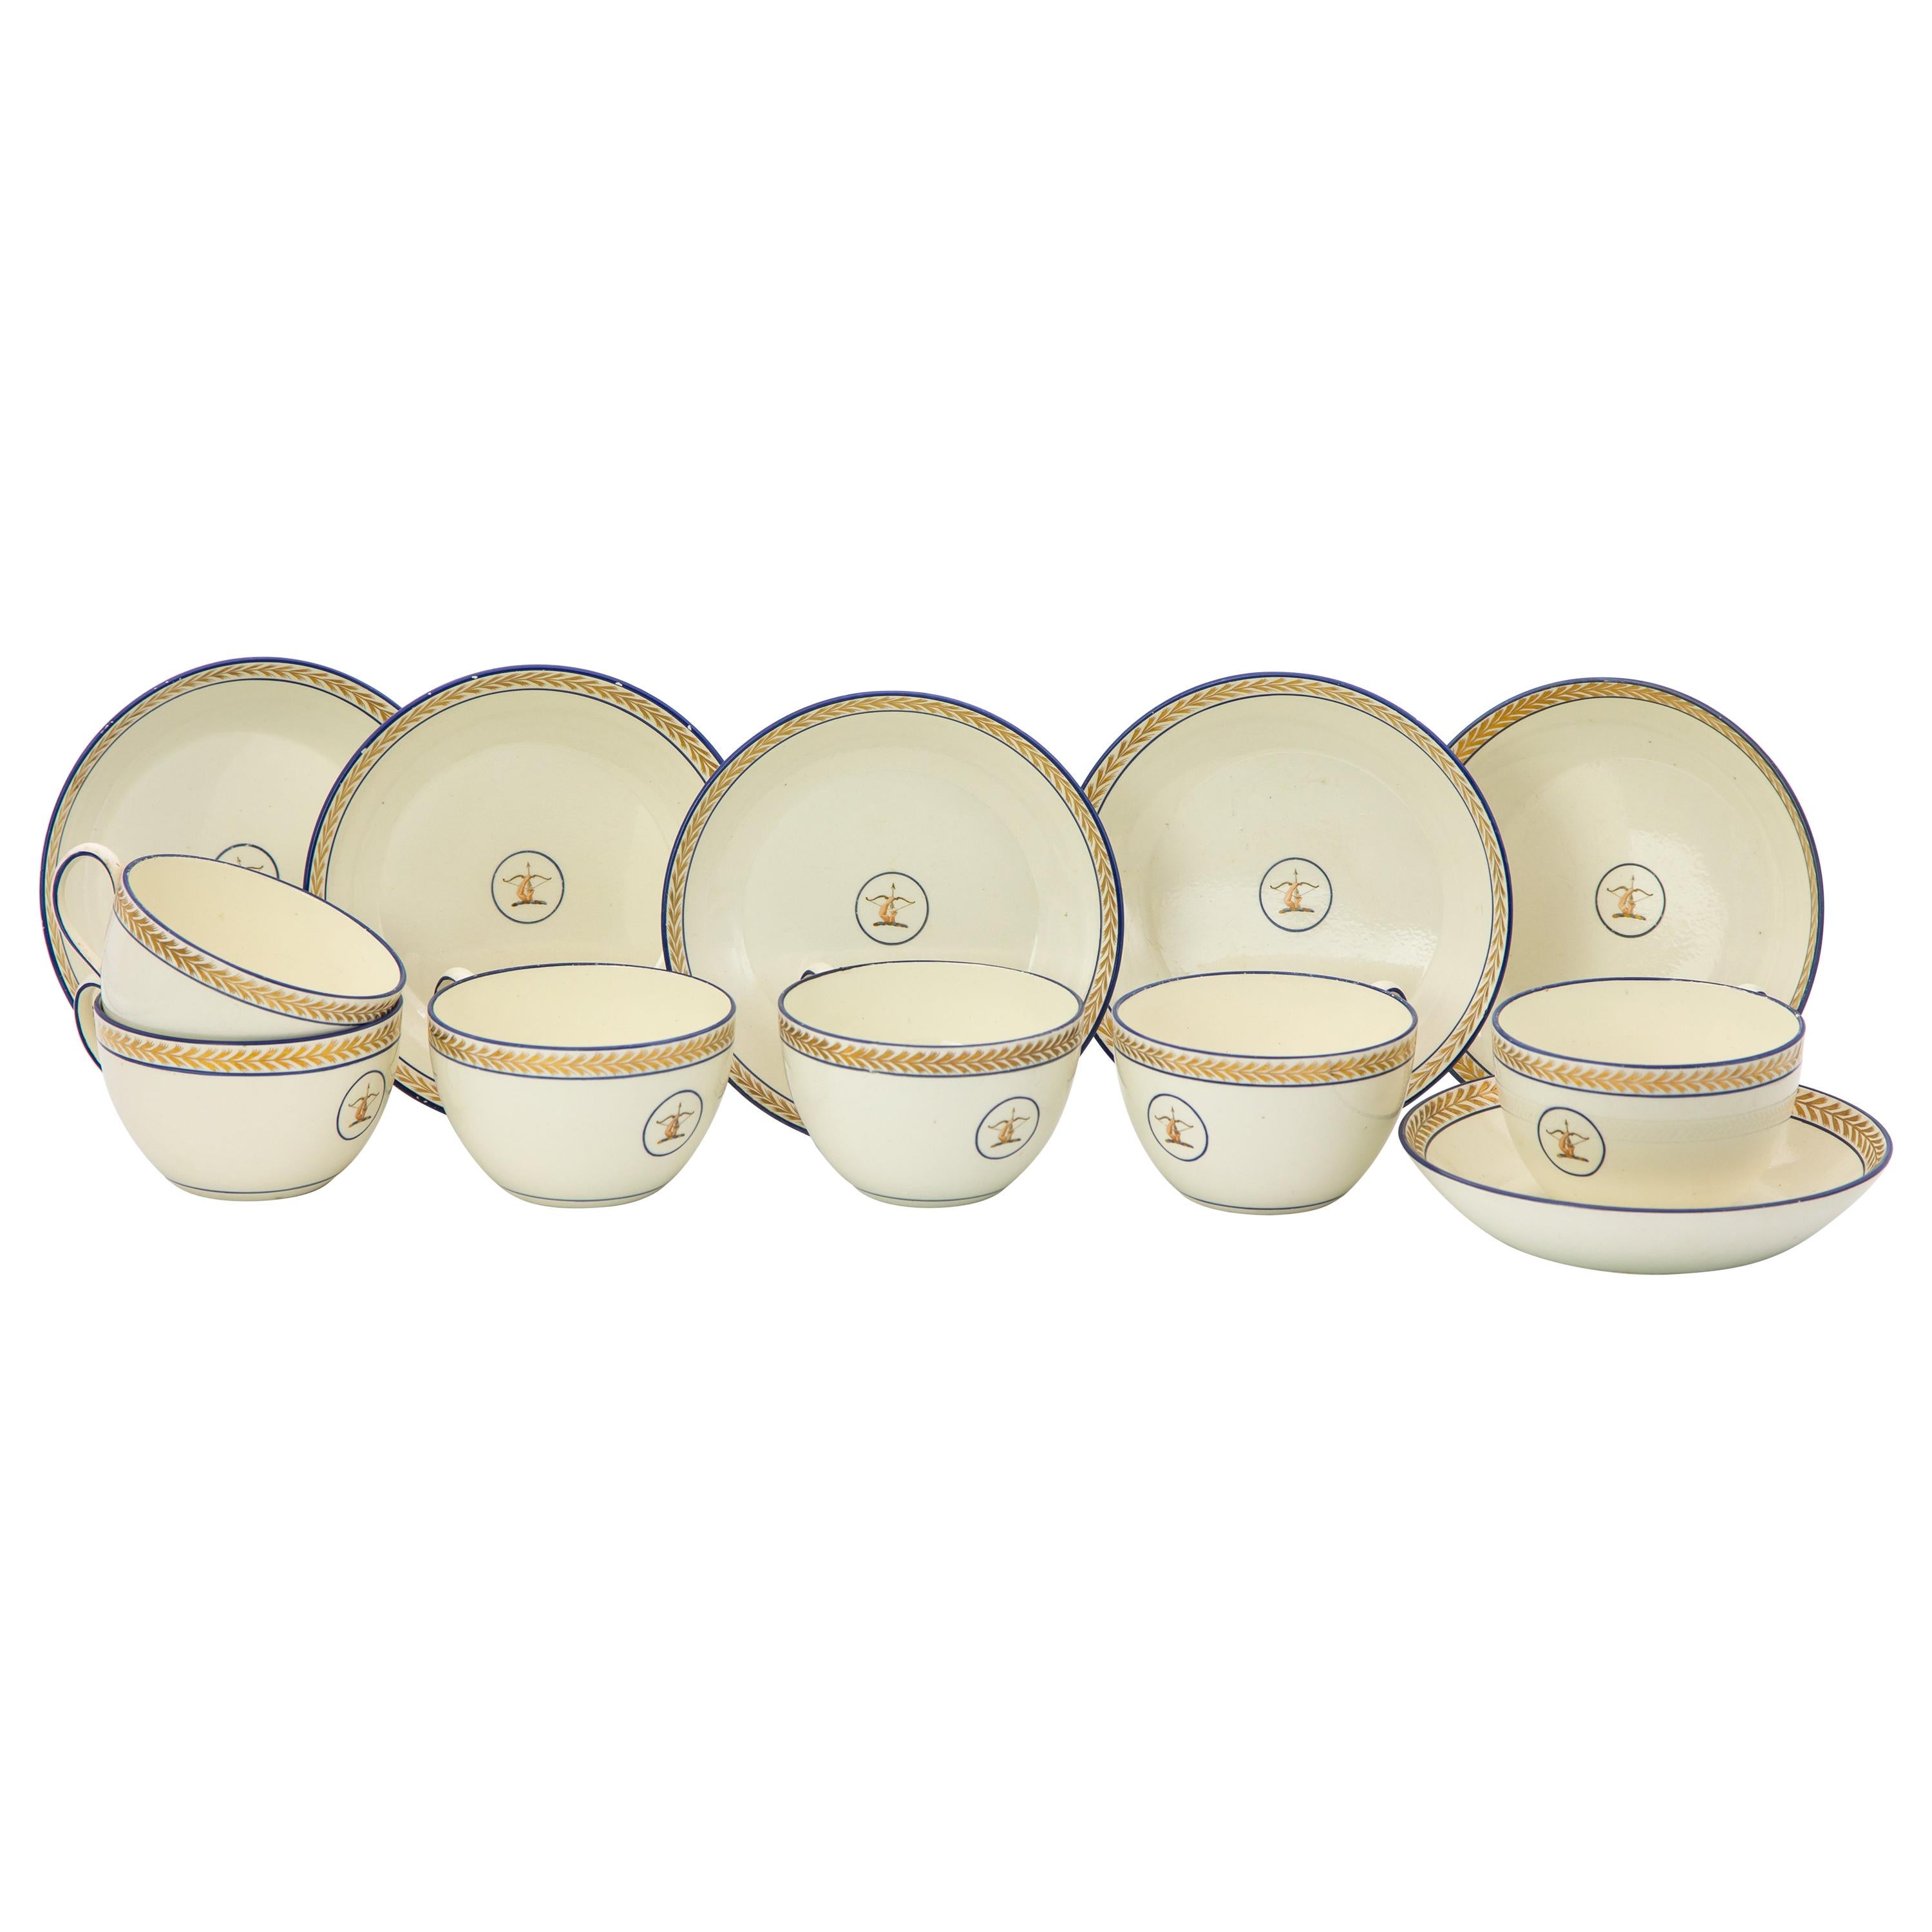 Set of Six Early Wedgwood Creamware Teacups and Saucers